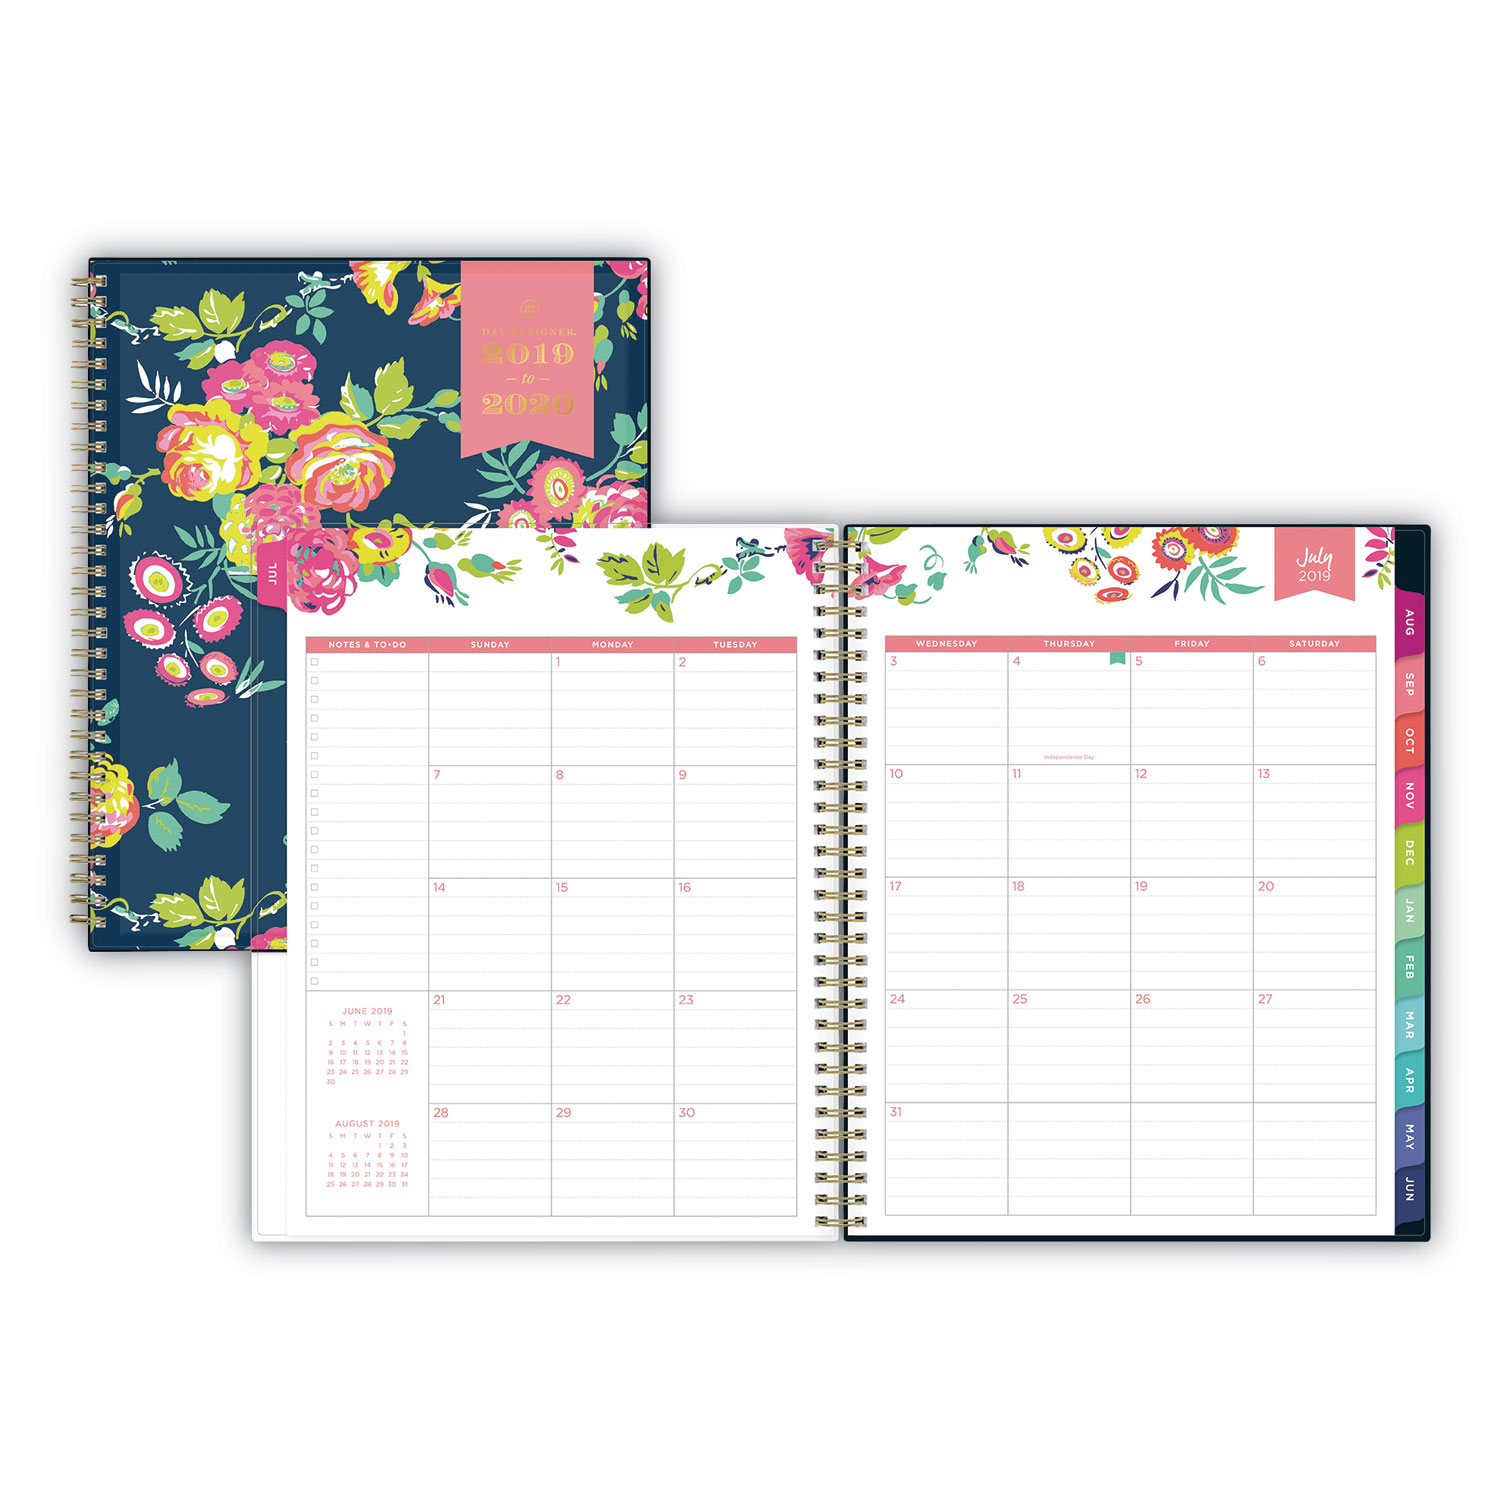  Blue Sky 107924 Day Designer Academic Year CYO Weekly/Monthly Planner, 11 x 8.5, Navy/Floral, 2020-2021 (BLS107924) 